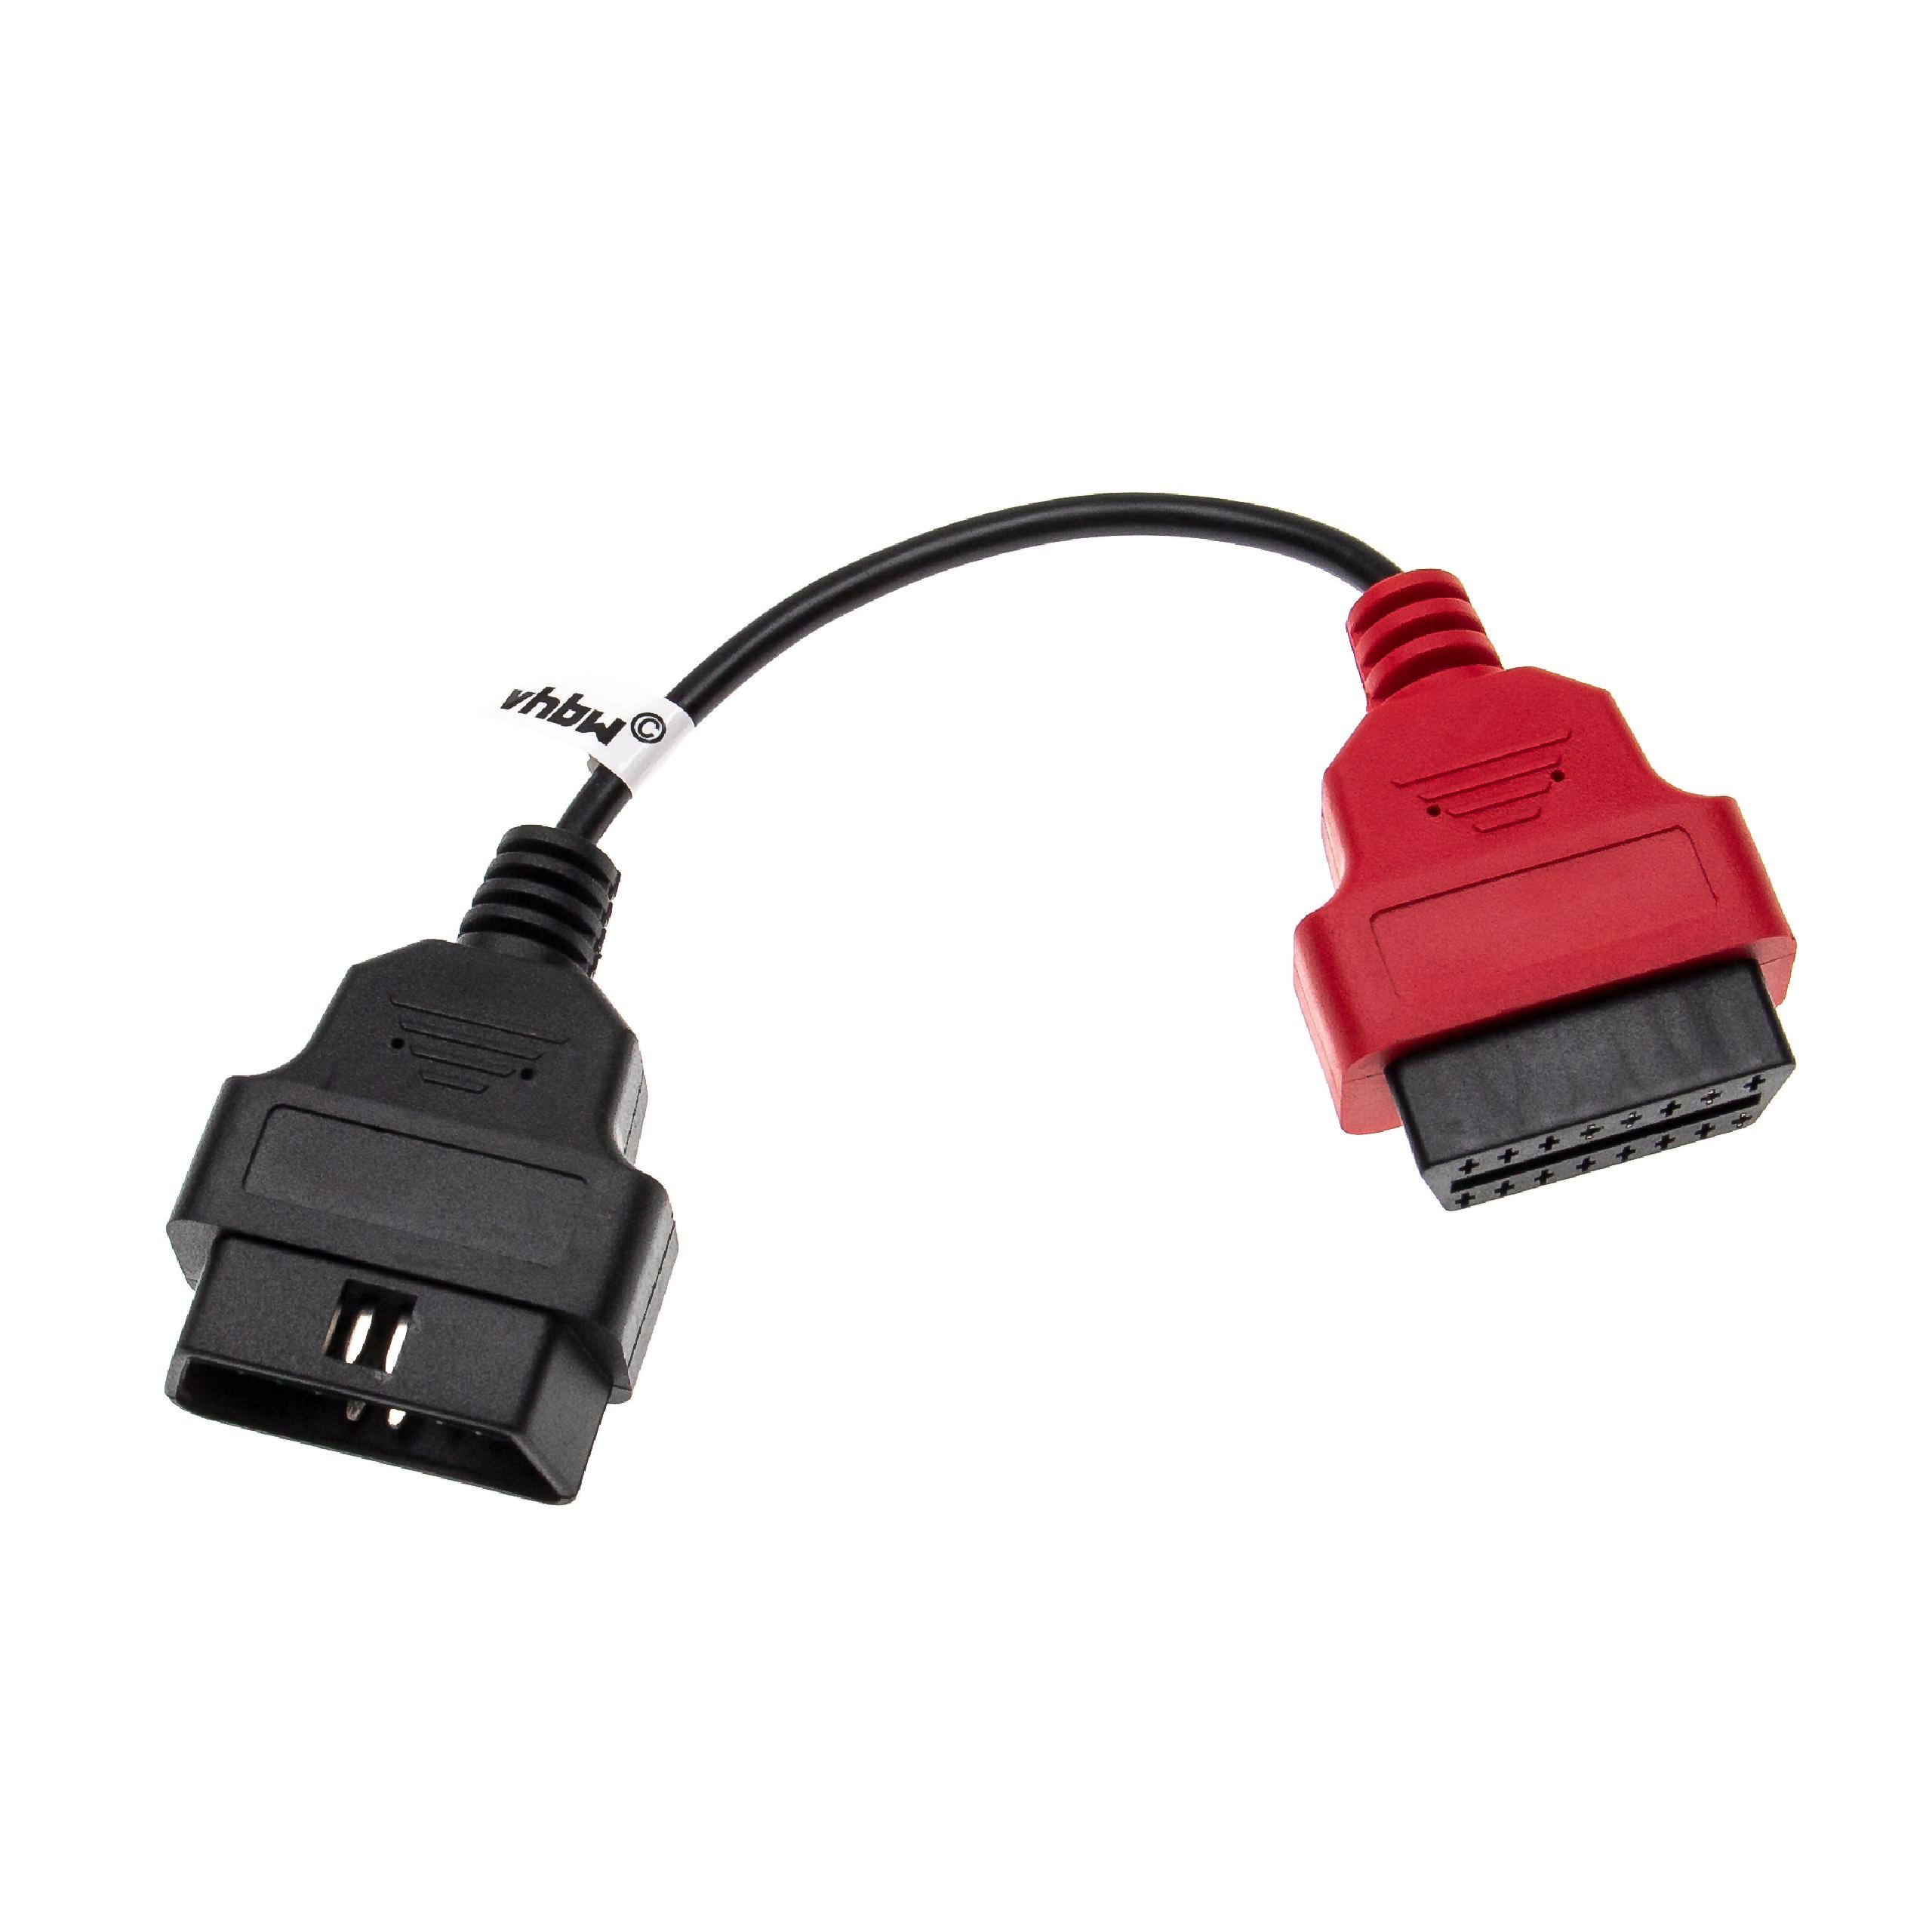 vhbw OBD2 Adapter A2 16Pin OBD1 to OBD2 suitable for GT Alfa Romeo, Fiat, Lancia GT Car, Vehicle - 22 cm